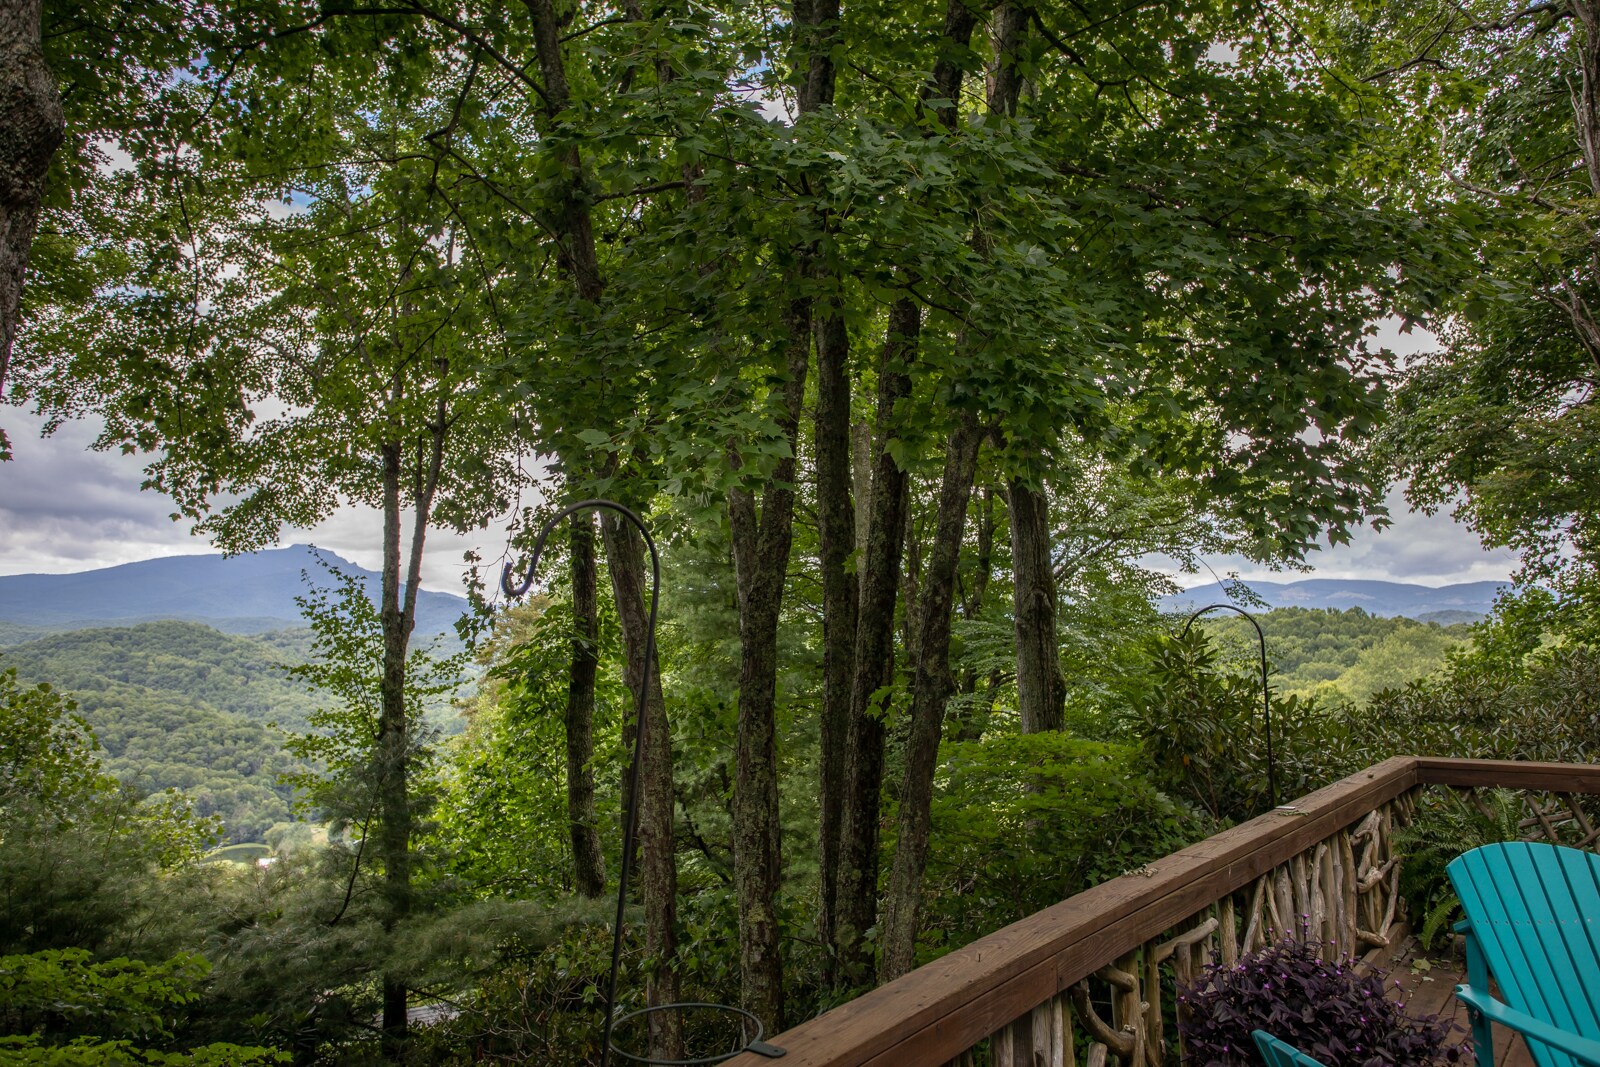 Though wooded, there are wonderful views of Grandfather Mountain from Azalea Hill